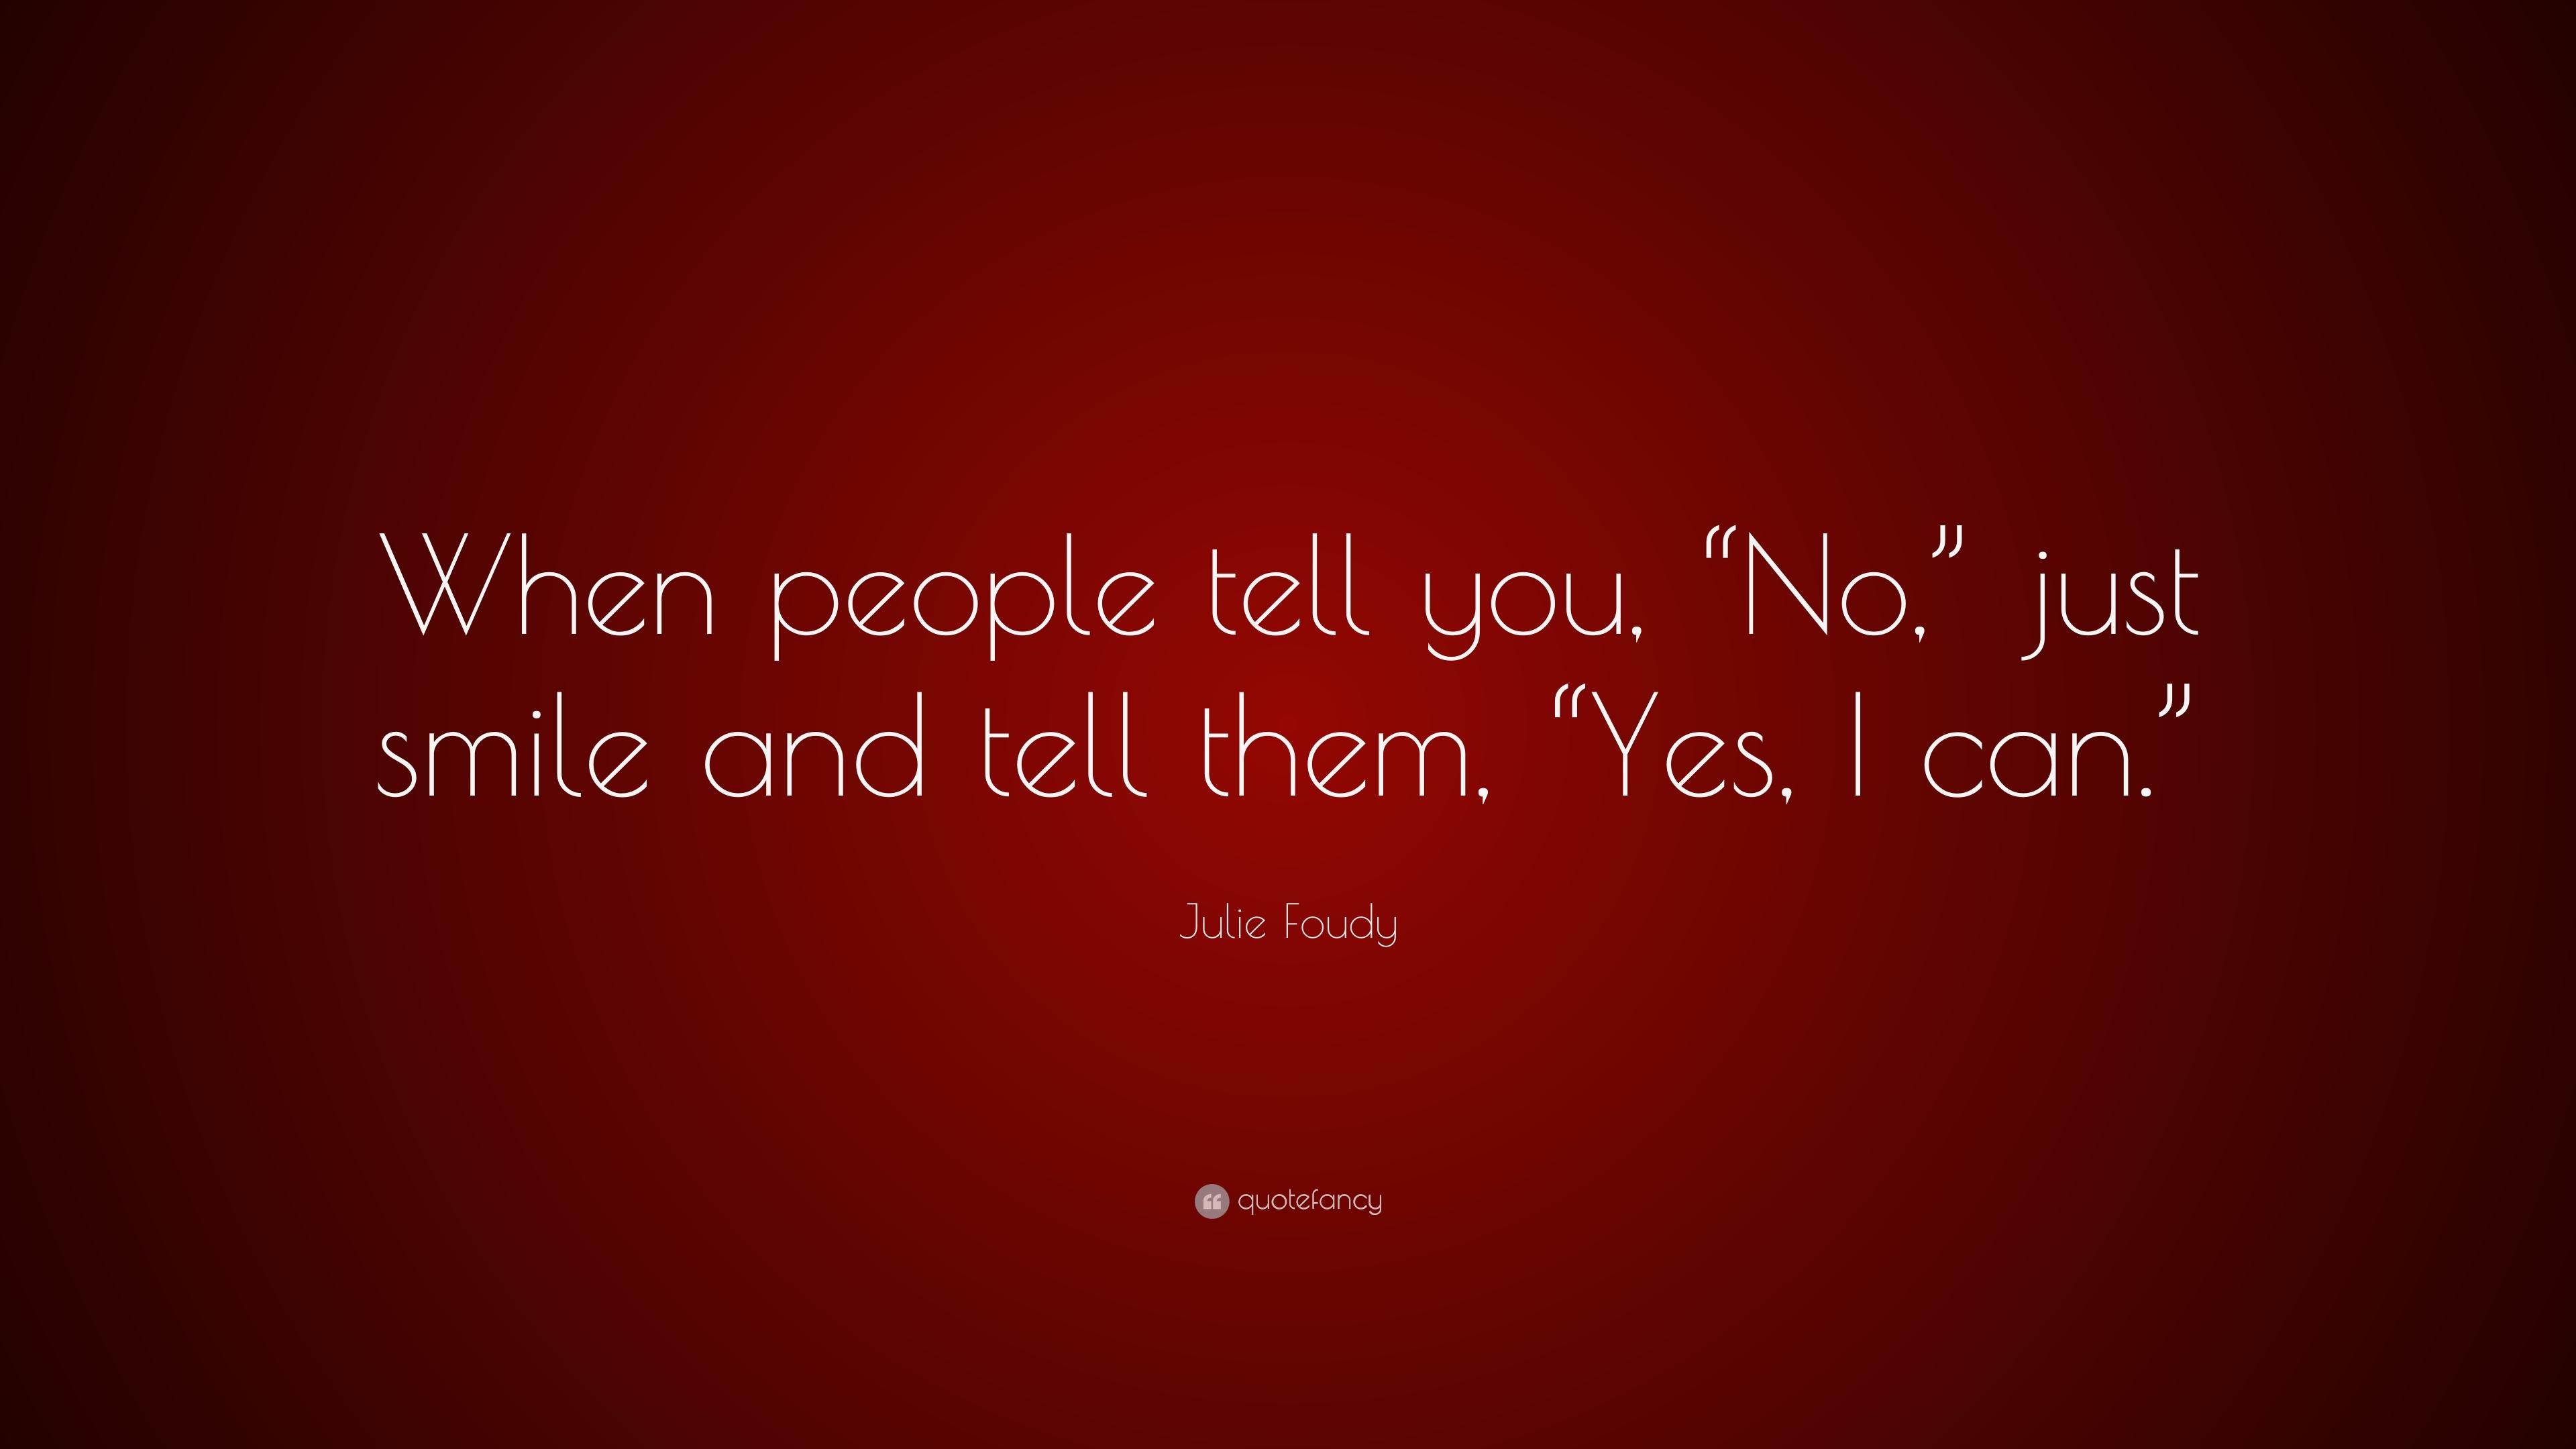 Julie Foudy Quote: “When people tell you, “No, ” just smile and tell